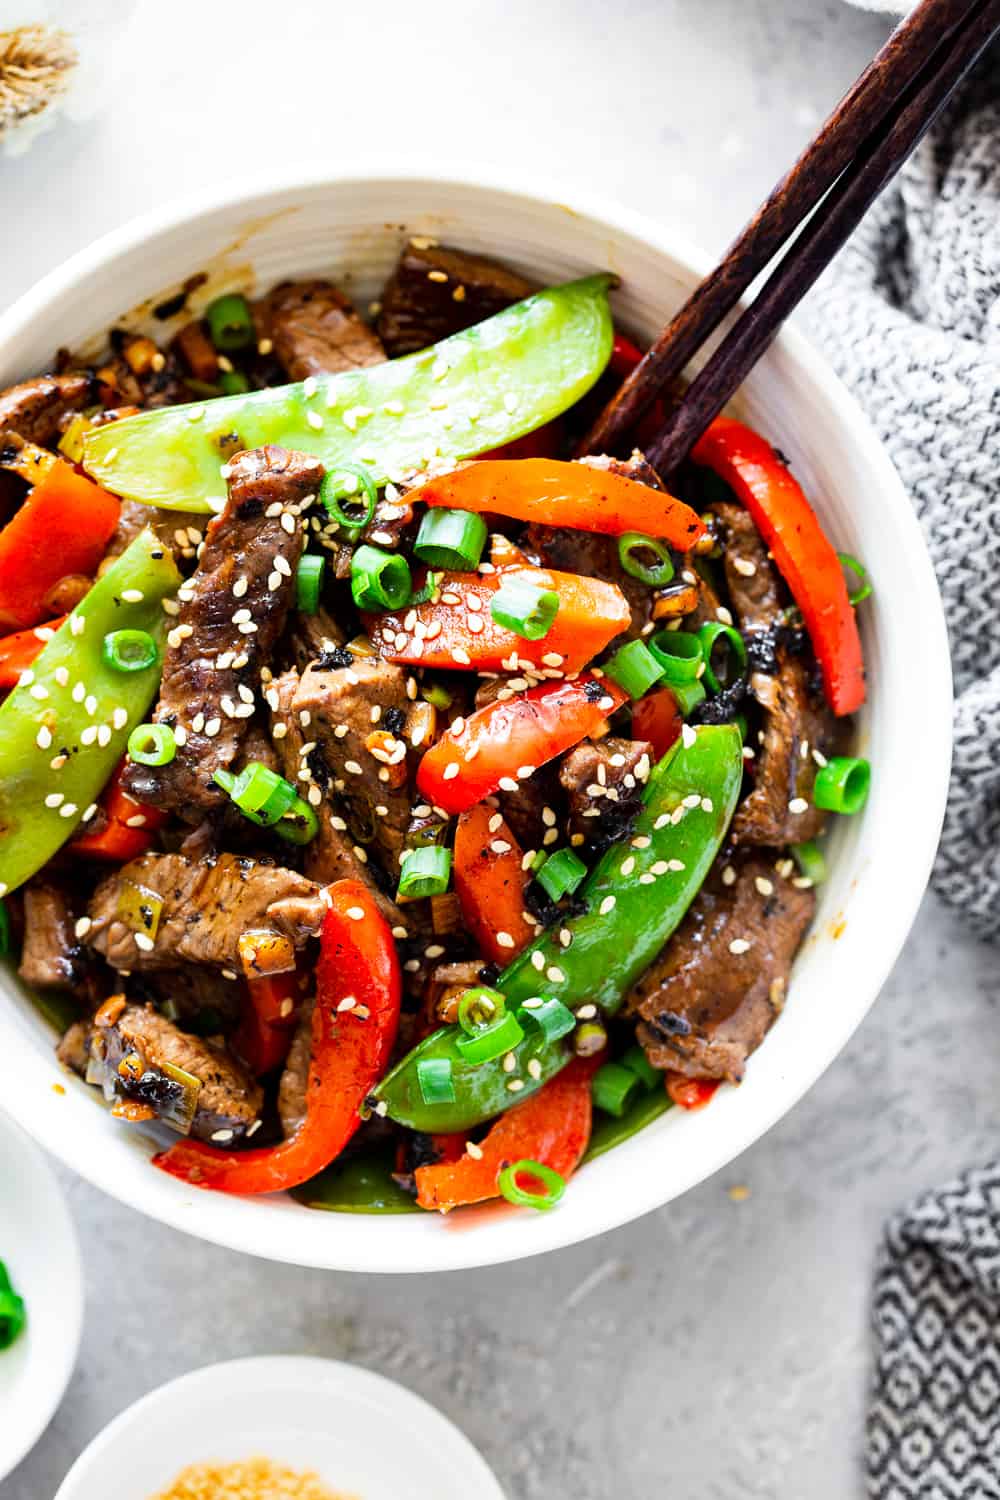 This quick and tasty paleo beef stir fry is loaded with flavor and veggies and uses clean simple ingredients. It’s so much healthier than takeout but just as fast! Family approved and great for weeknight dinners. I love serving it over fried cauliflower rice to keep it paleo, Whole30 compliant and low carb too. #paleo #whole30 #lowcarb #keto